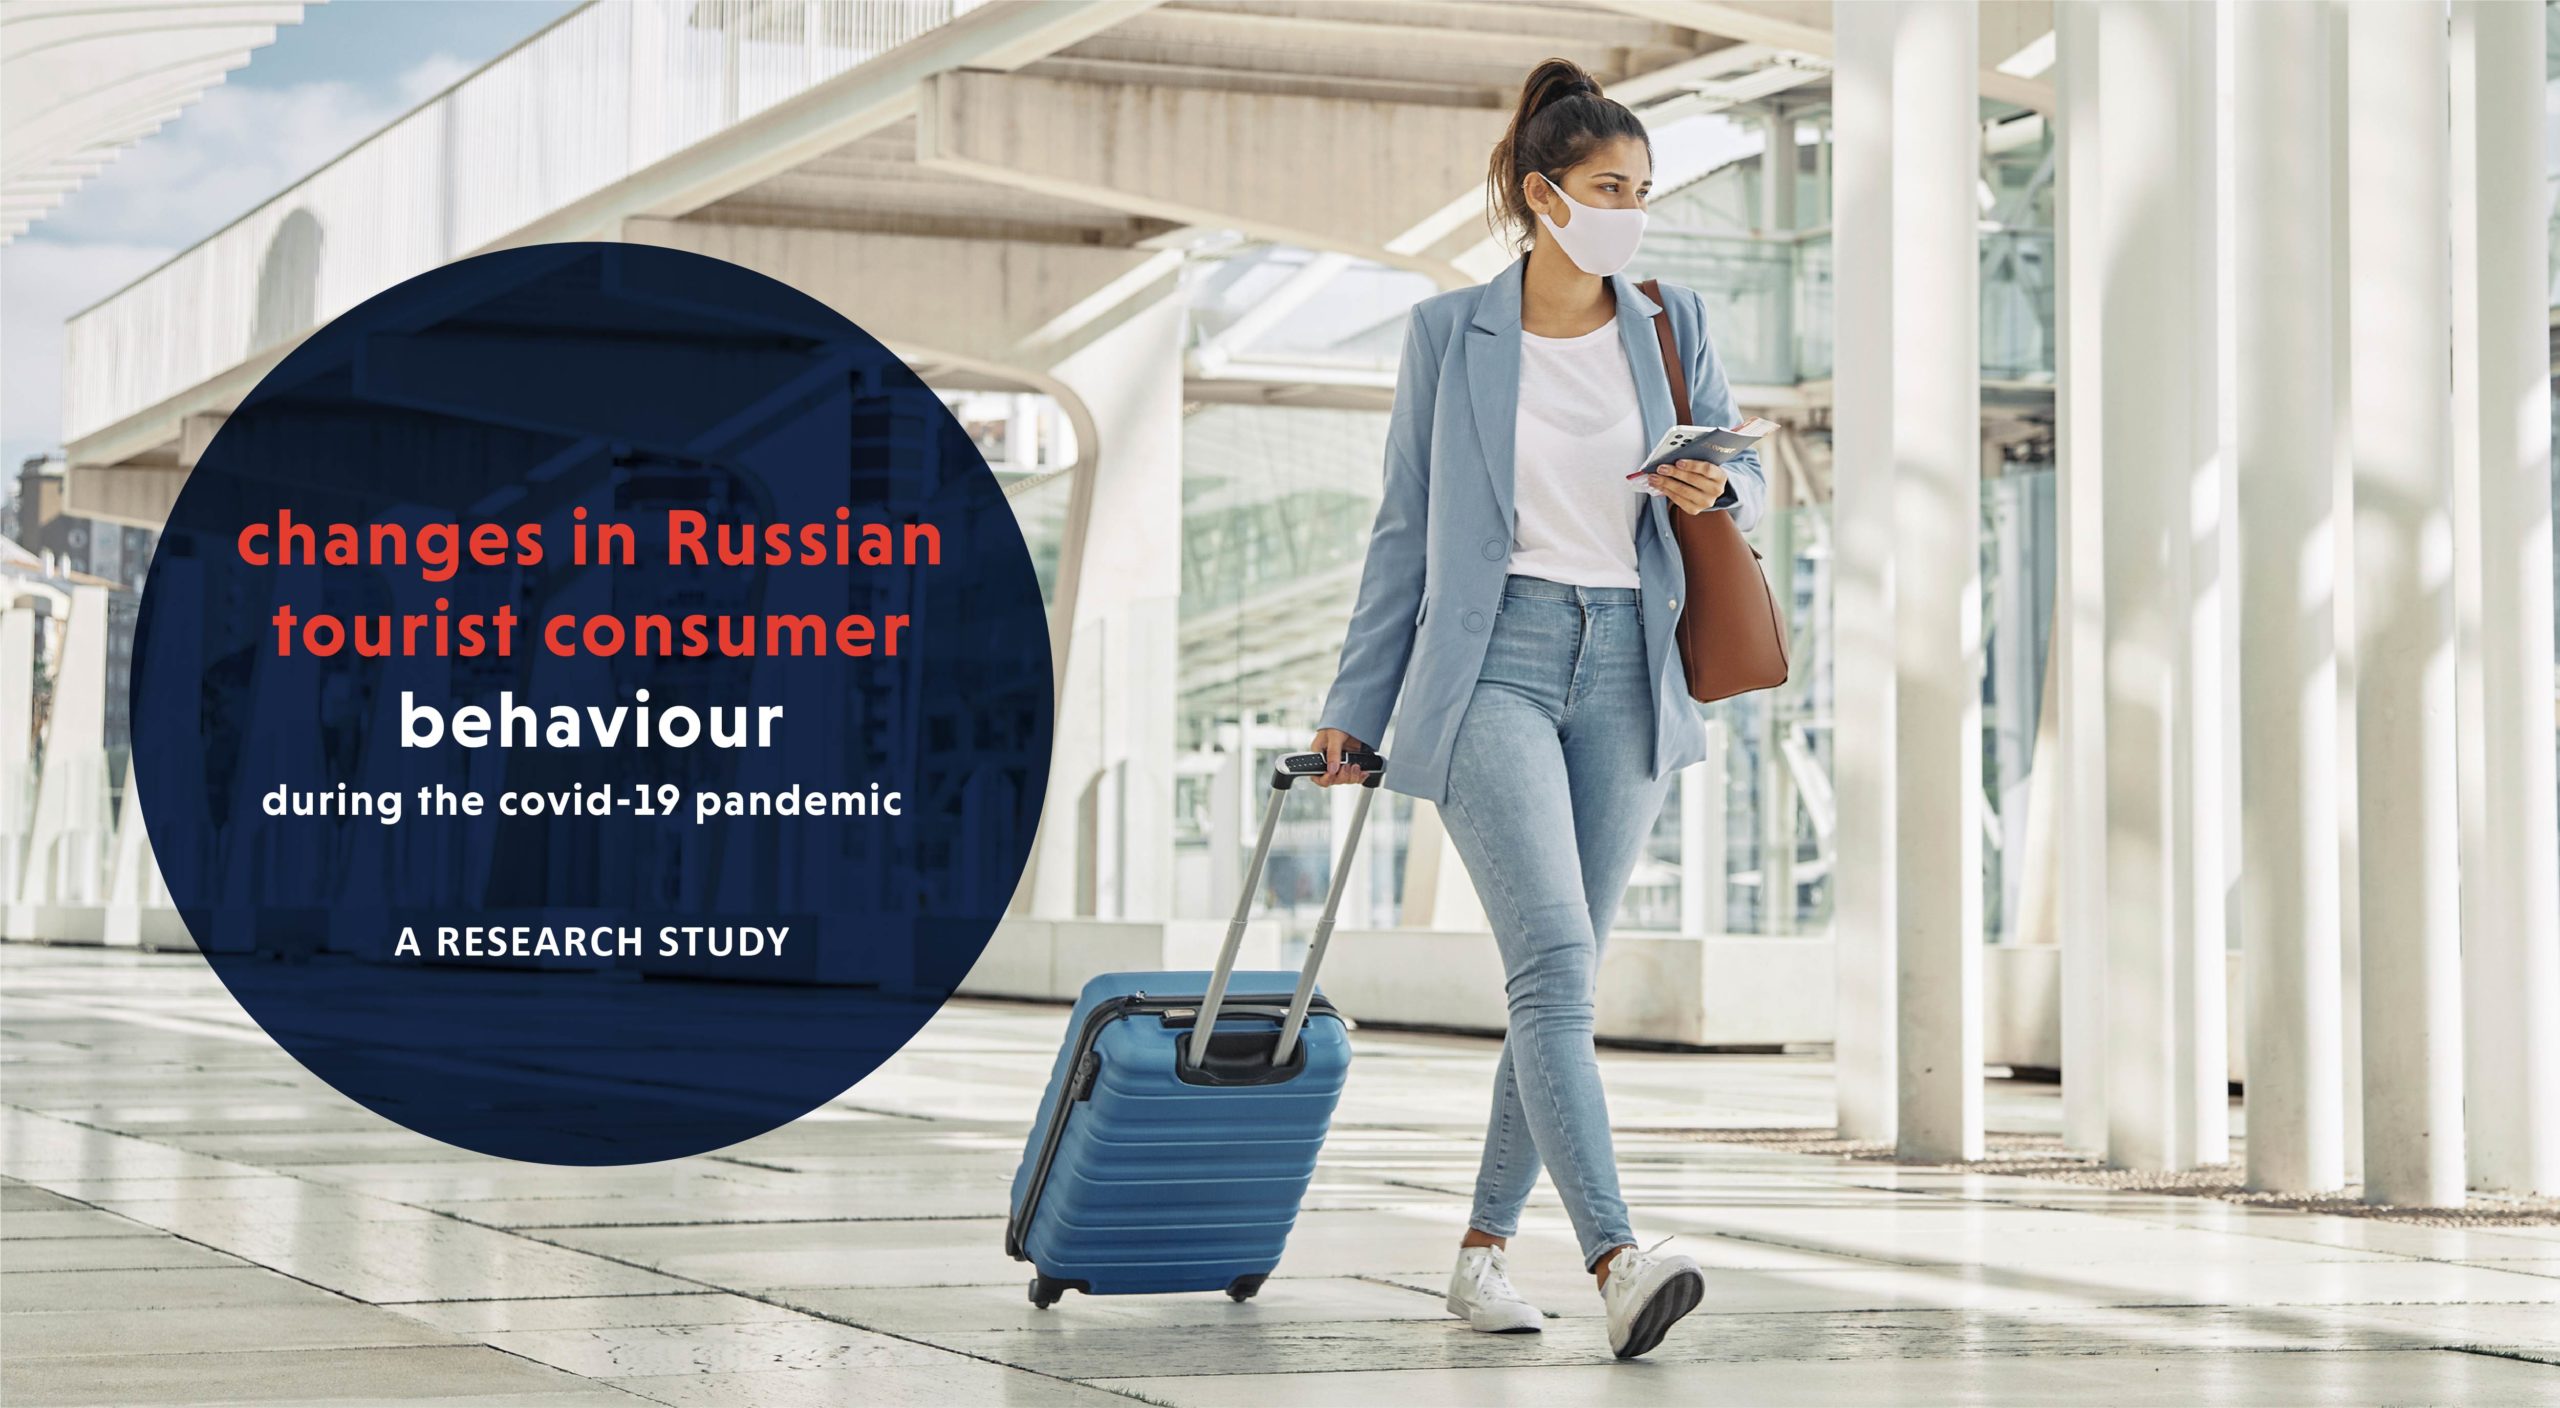 changes in Russian tourist consumer behaviour during the covid-19 pandemic